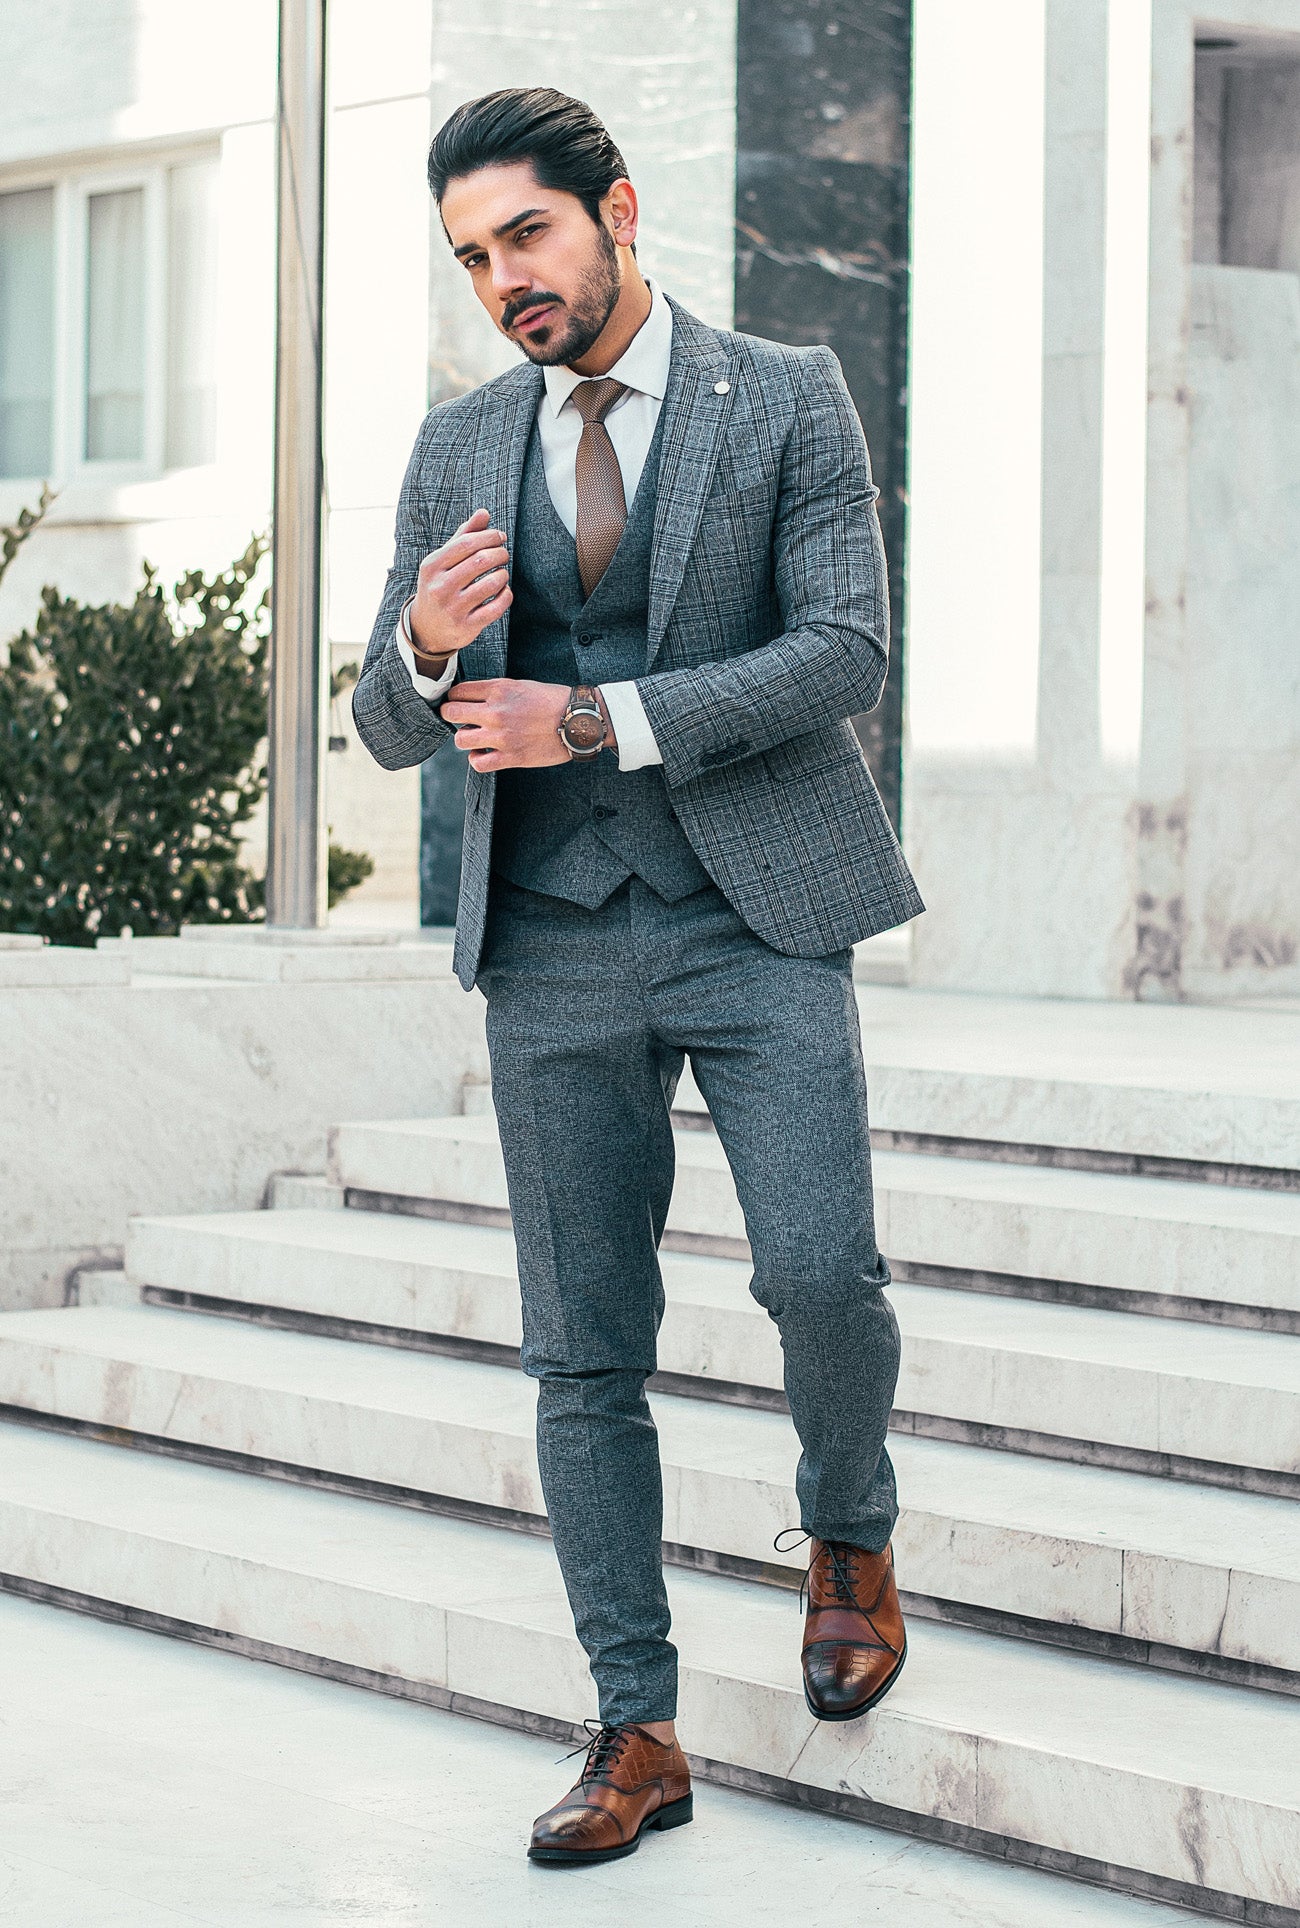 How to wear white sneakers with Suit - uvmensfashion | Suits and sneakers,  Sneakers outfit men, Mens fashion casual outfits